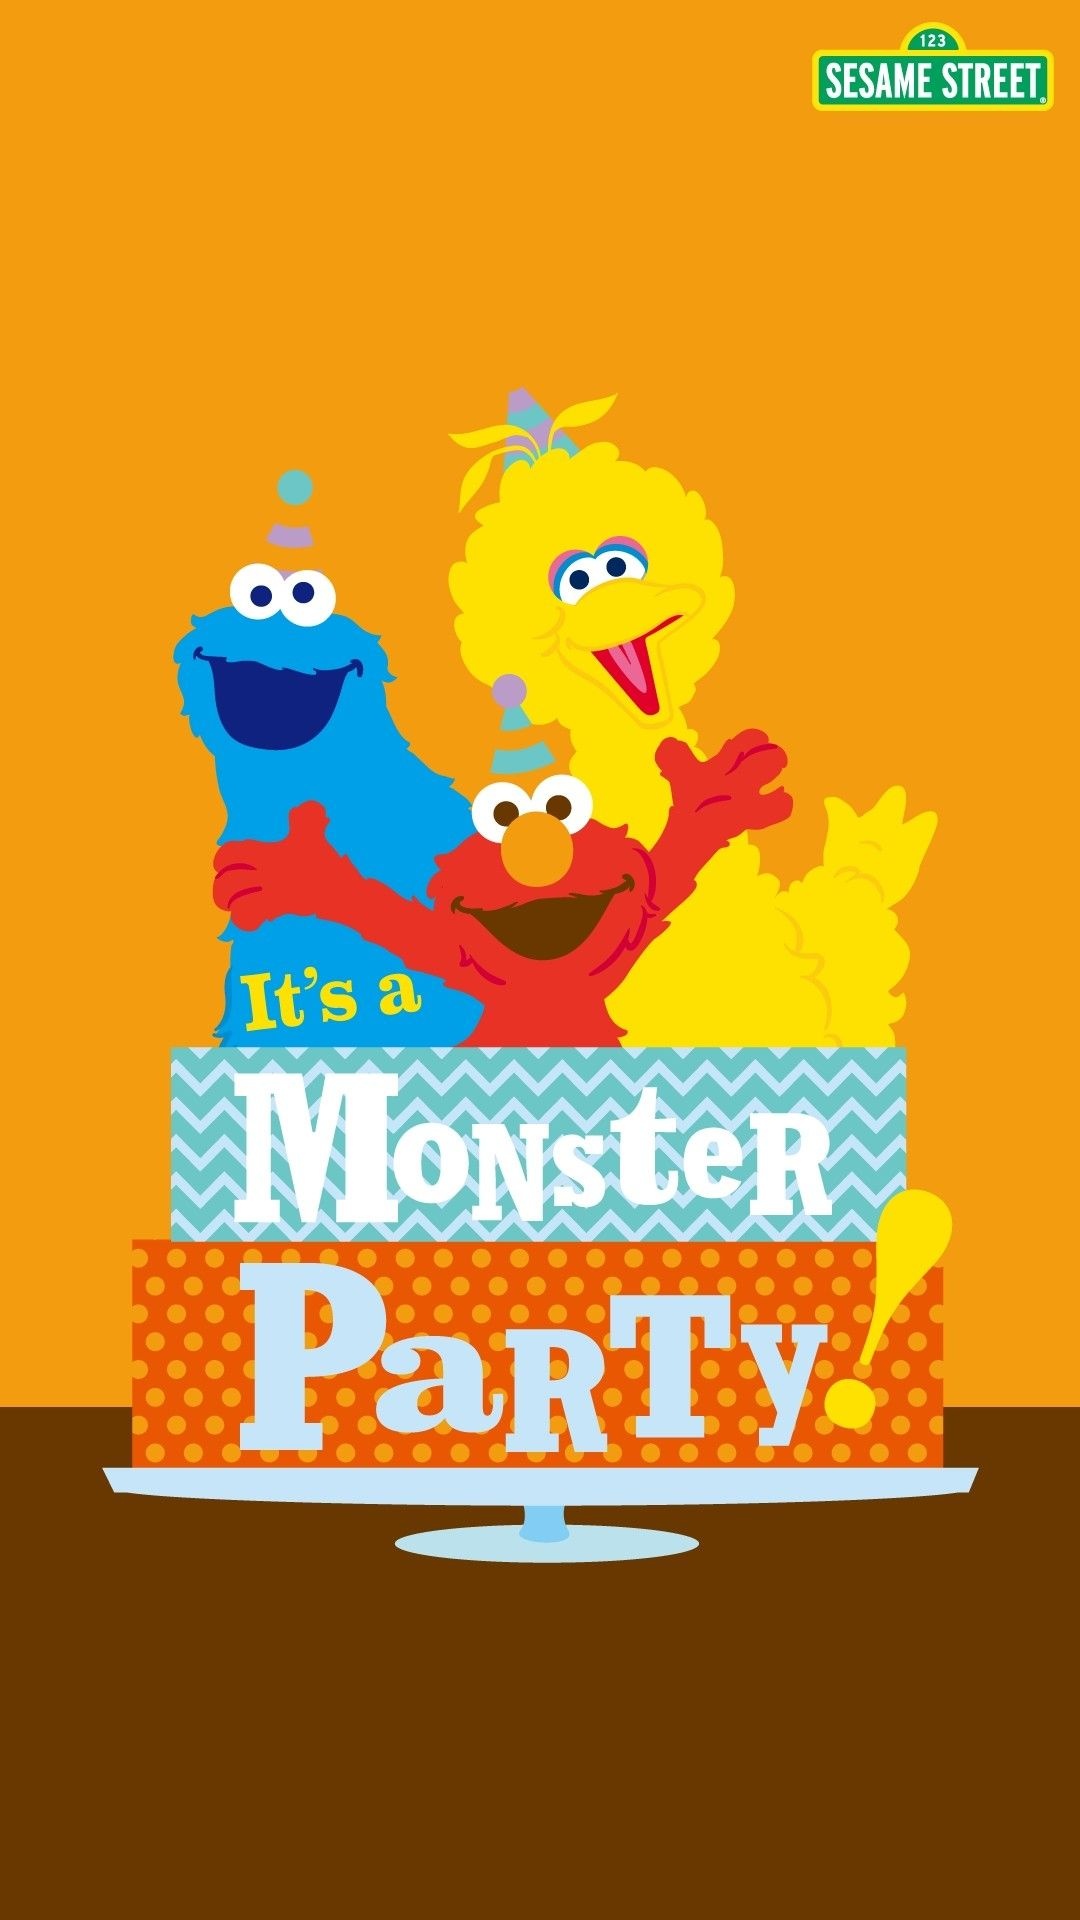 Sesame Street, Muppet wallpapers, Cute characters, Fun backgrounds, 1080x1920 Full HD Phone